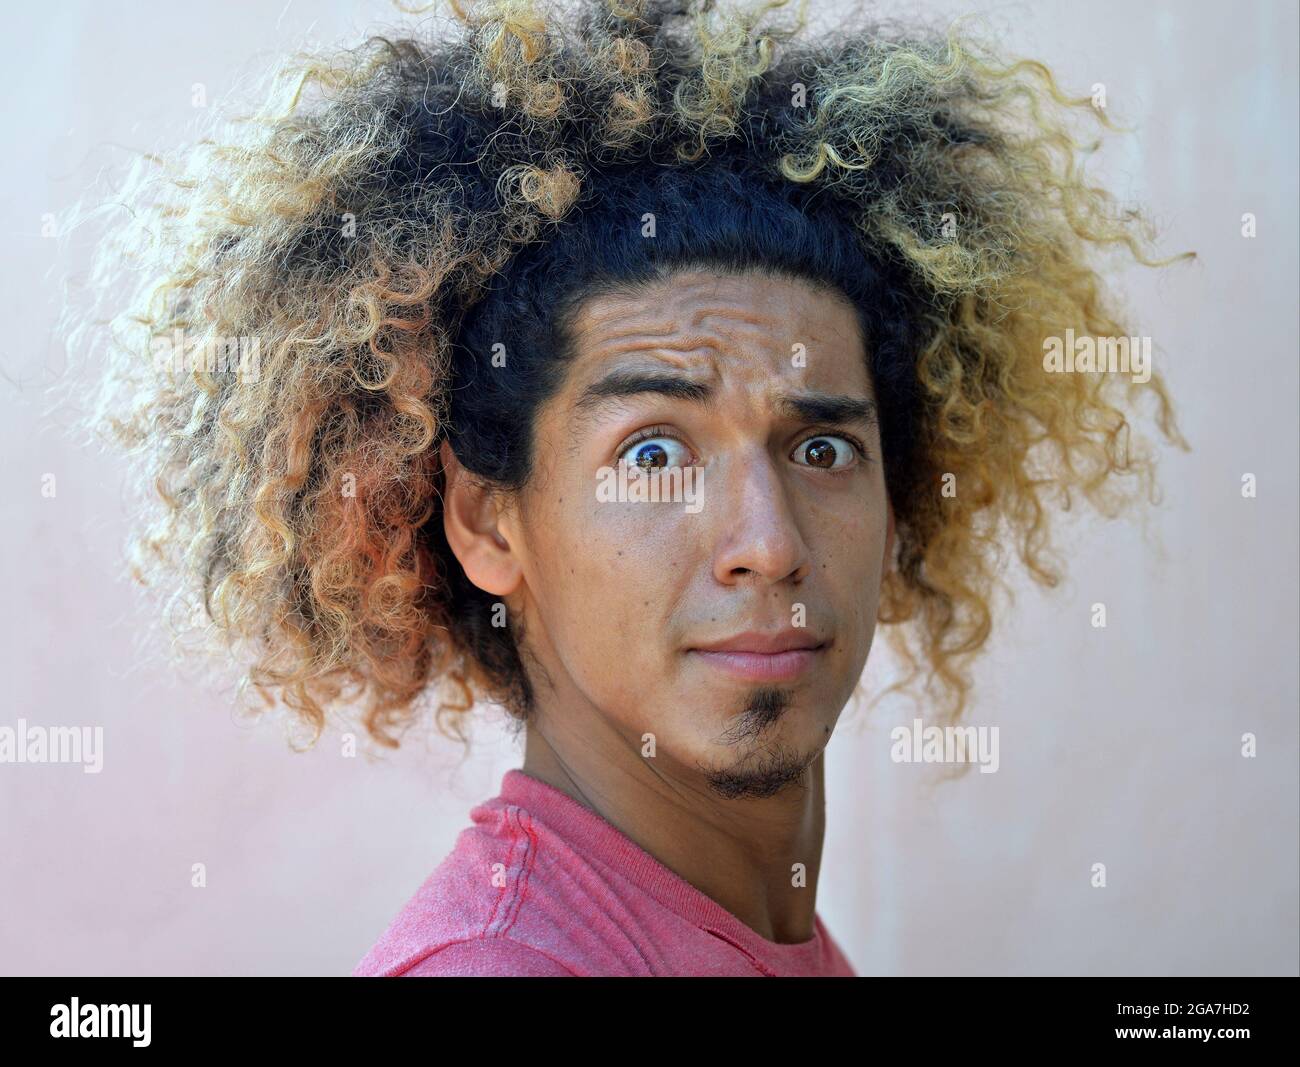 Young Latin American man with a shock of wild curly hair and blond dyed hair ends stares surprised with big eyes and wrinkled forehead at the camera. Stock Photo